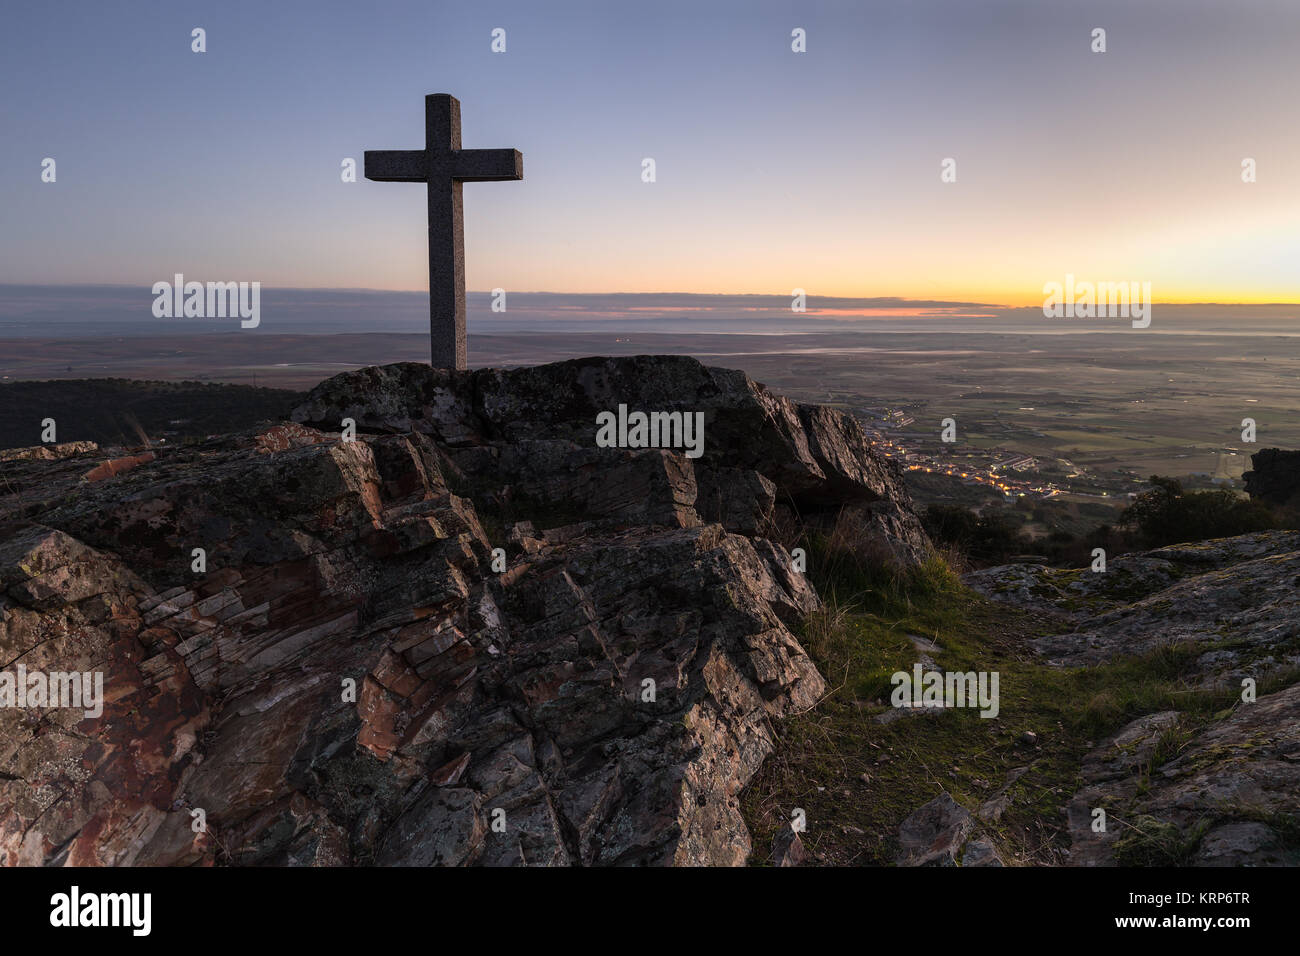 Dawn with cross in the foreground next to Sierra de Fuentes. Spain. Stock Photo